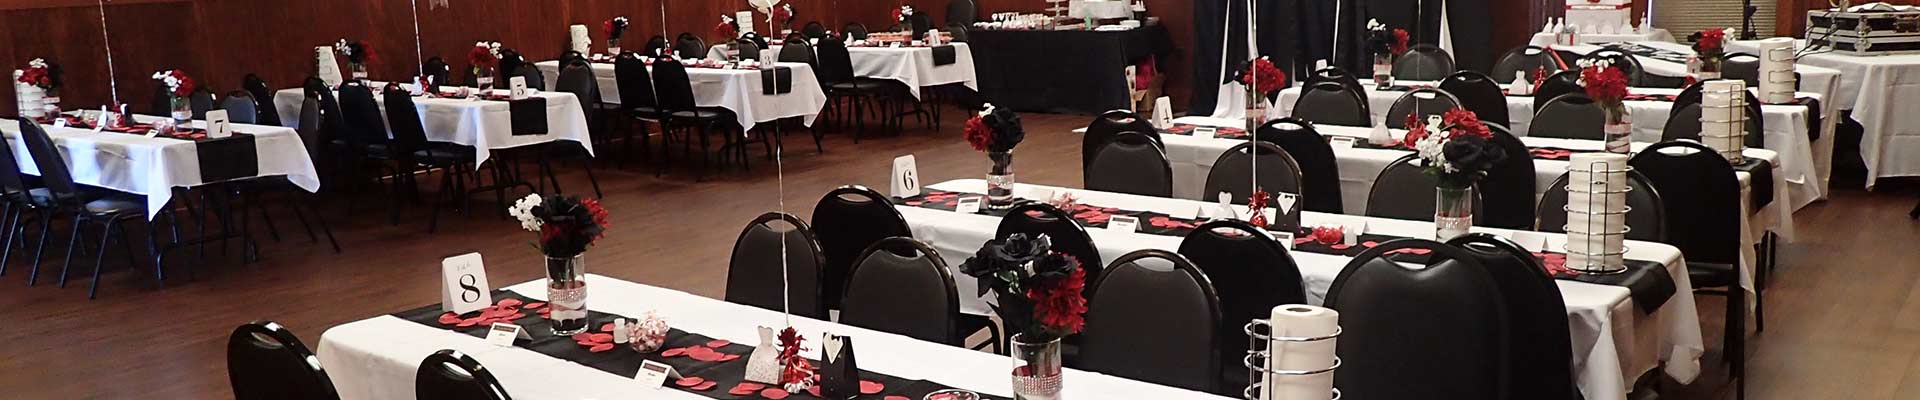 Free Banquet Room and Free Party Room